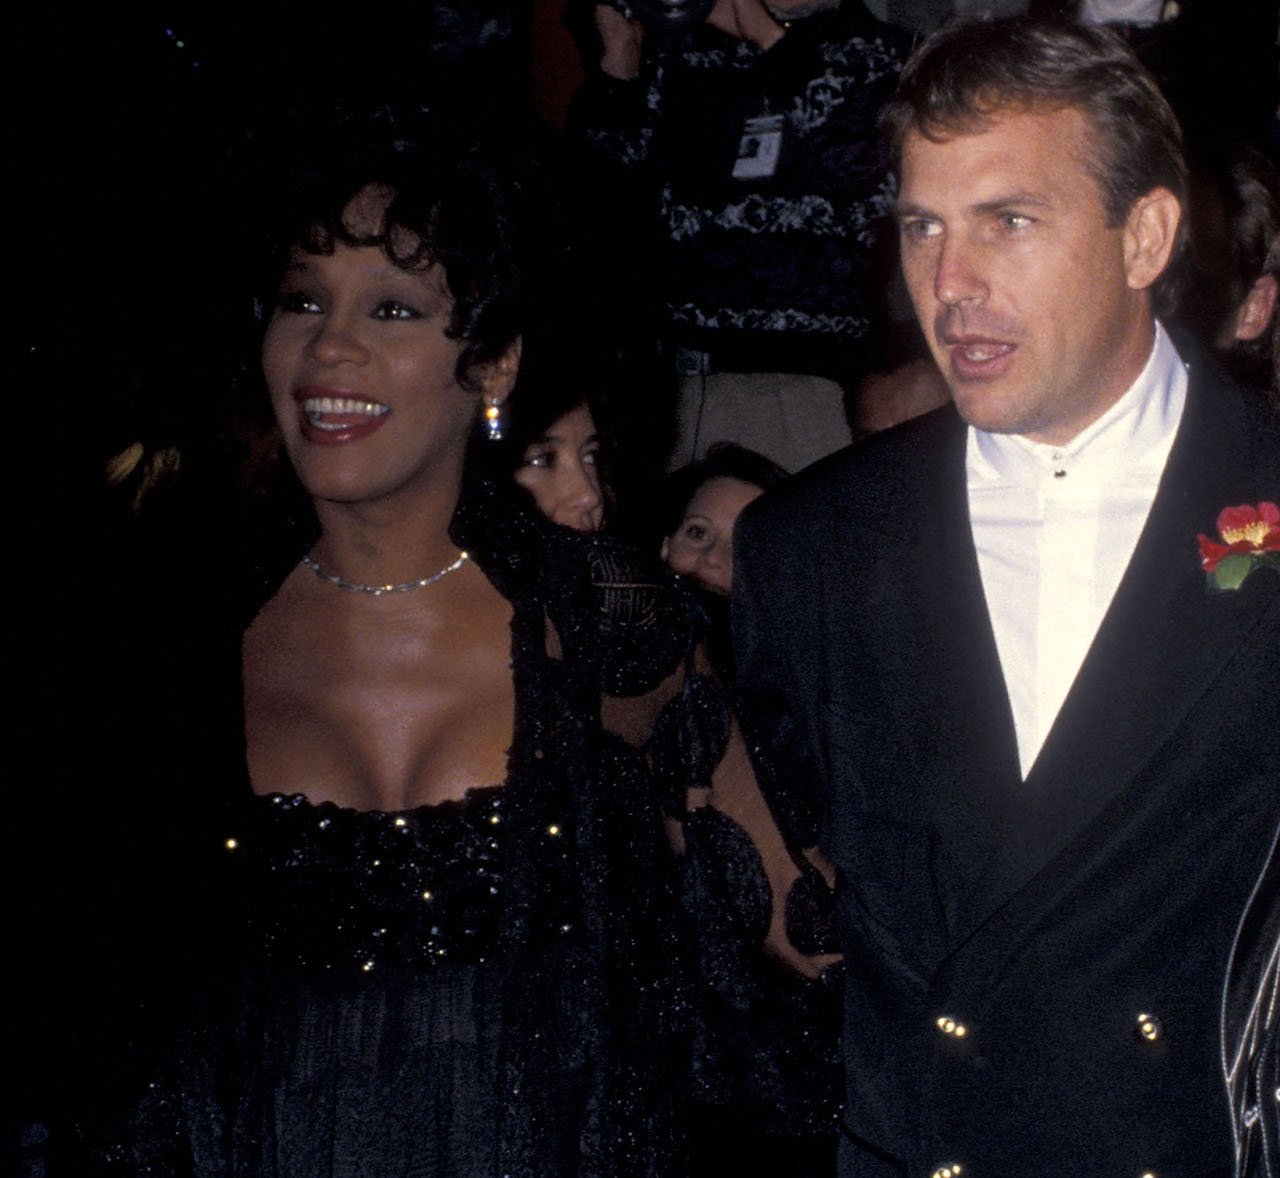 https://www.cheatsheet.com/wp-content/uploads/2022/09/Whitney-Houston-and-Kevin-Costner-attend-The-Bodyguard-premiere-the-film-is-being-re-released-for-its-30th-anniversary.jpg